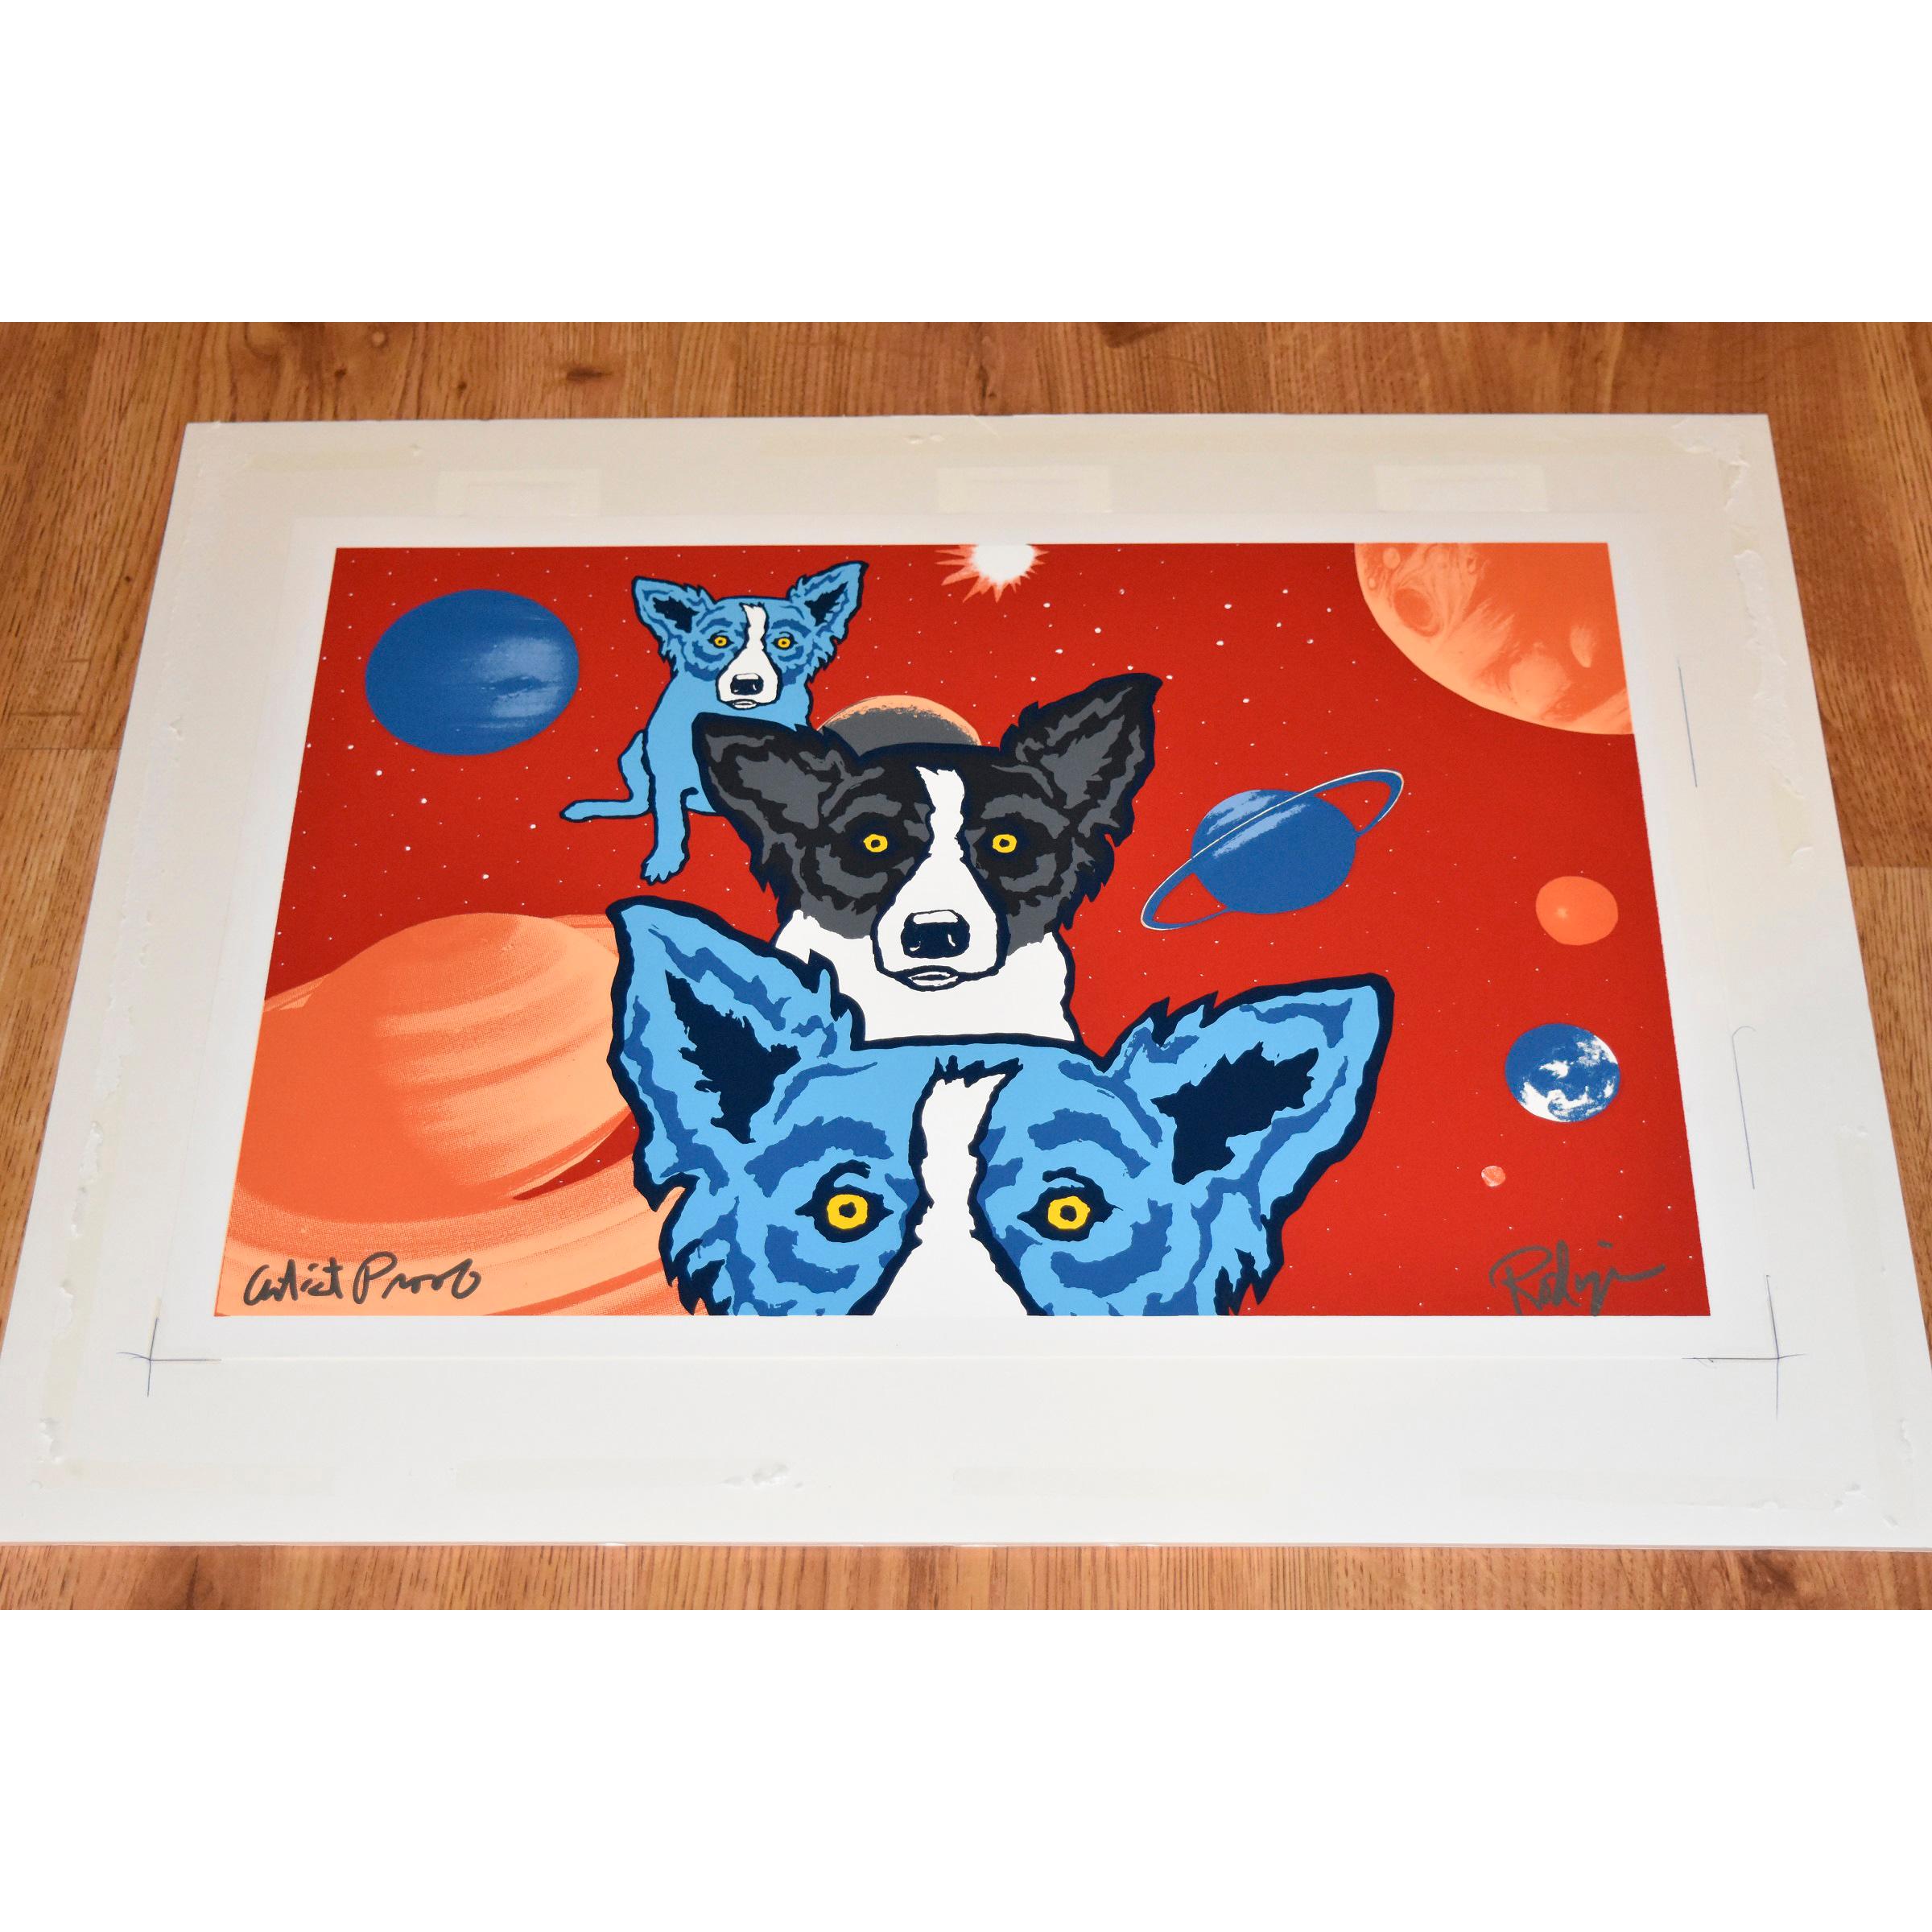 This Blue Dog work consists of a red background with the universe planets scattered about.  There are 3 dogs, 2 blue dogs with one white and black dog between them in a vertical view.  All the dogs have soulful yellow eyes.  This pop art animal